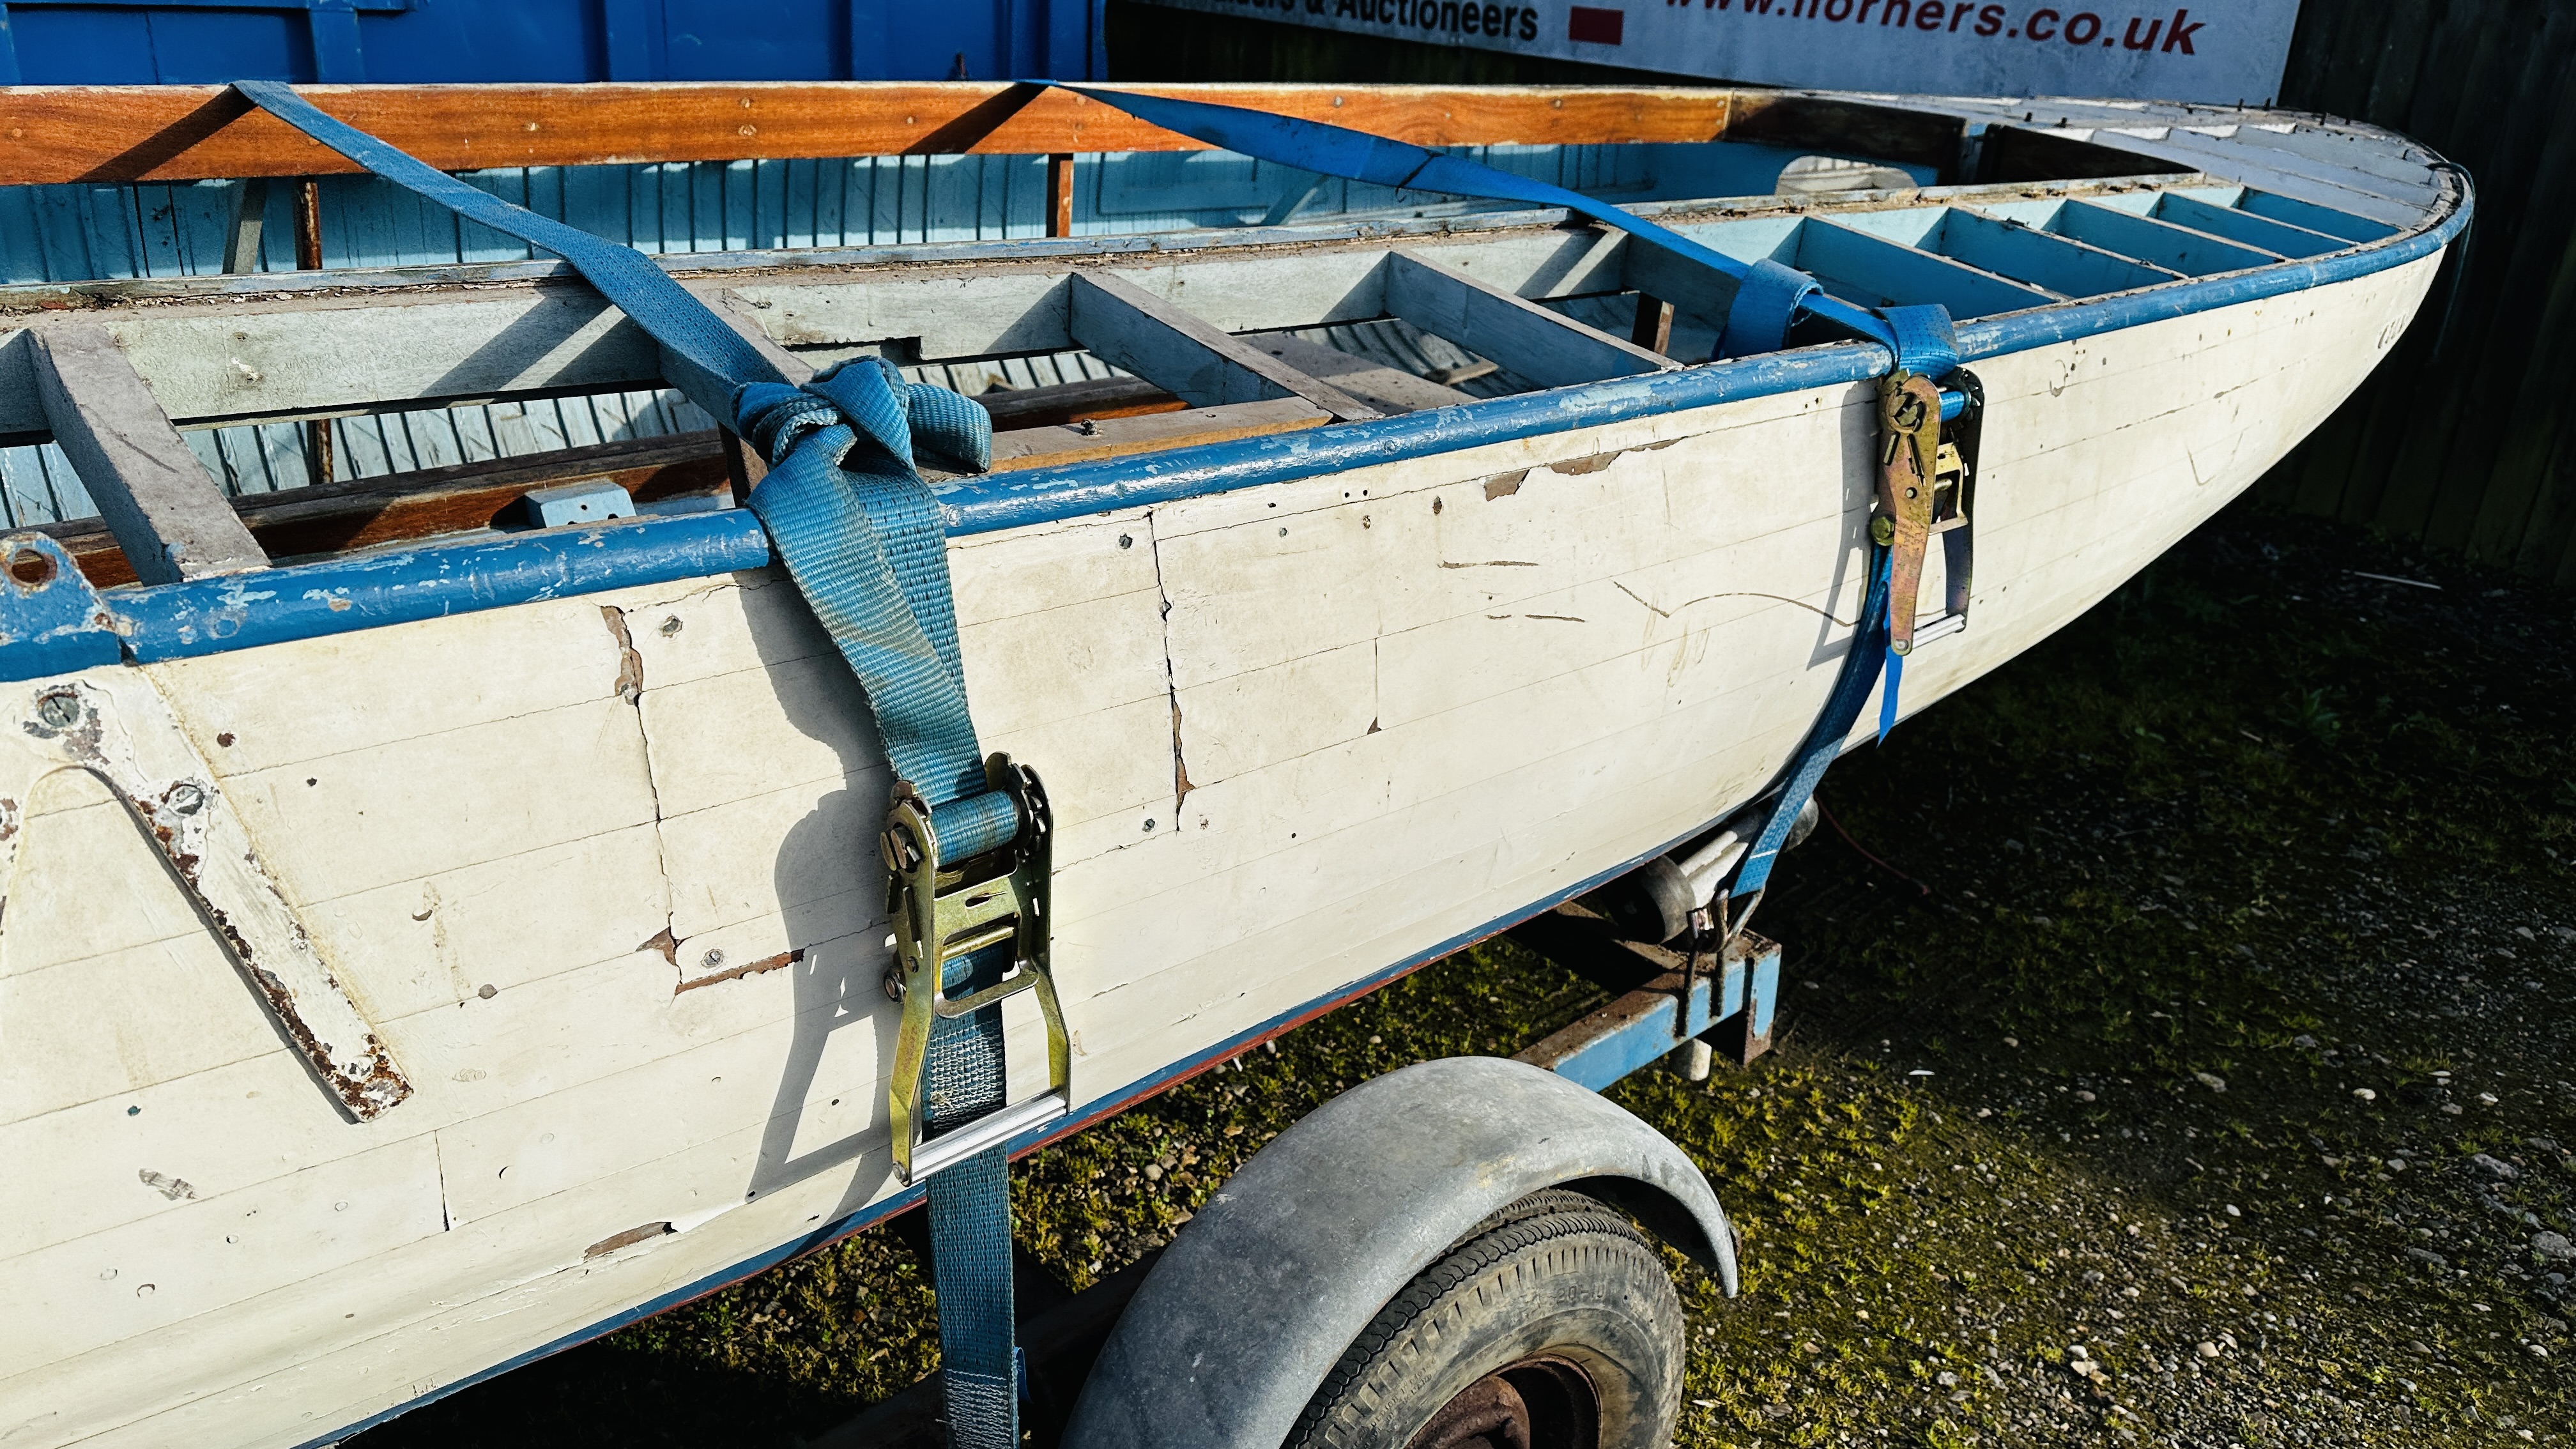 A WW2 UFFA FOX RESCUE BOAT BELIEVED TO BE BUILT BY TAYLOR WOODROW, STAMPED AW11, 1 OF 402 MADE, - Image 35 of 56